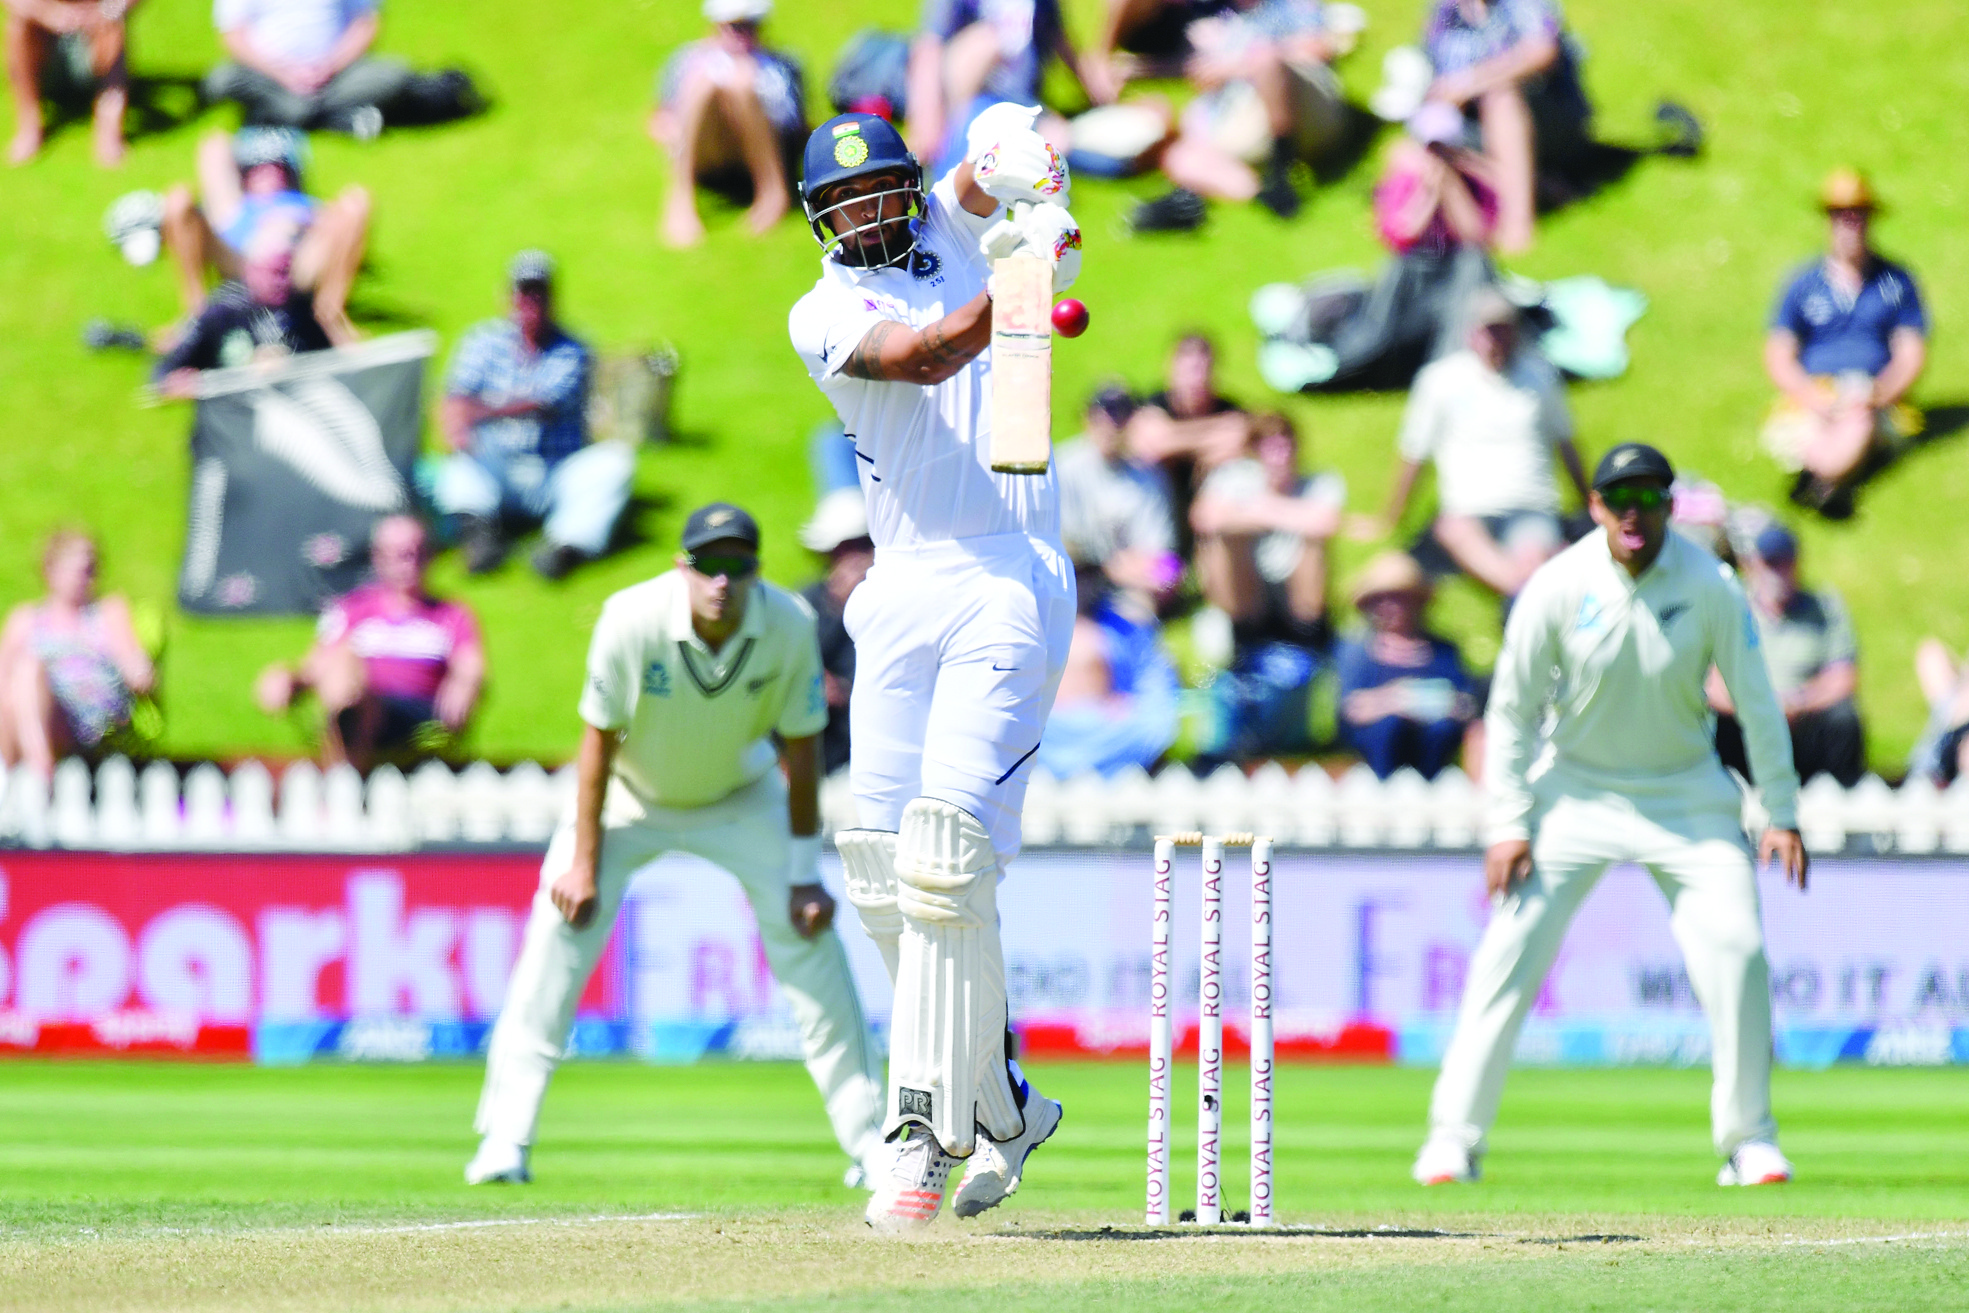 India's Ishant Sharma plays a shot during day four of the first Test cricket match between New Zealand and India at the Basin Reserve in Wellington on February 24, 2020. (Photo by Marty MELVILLE / AFP)